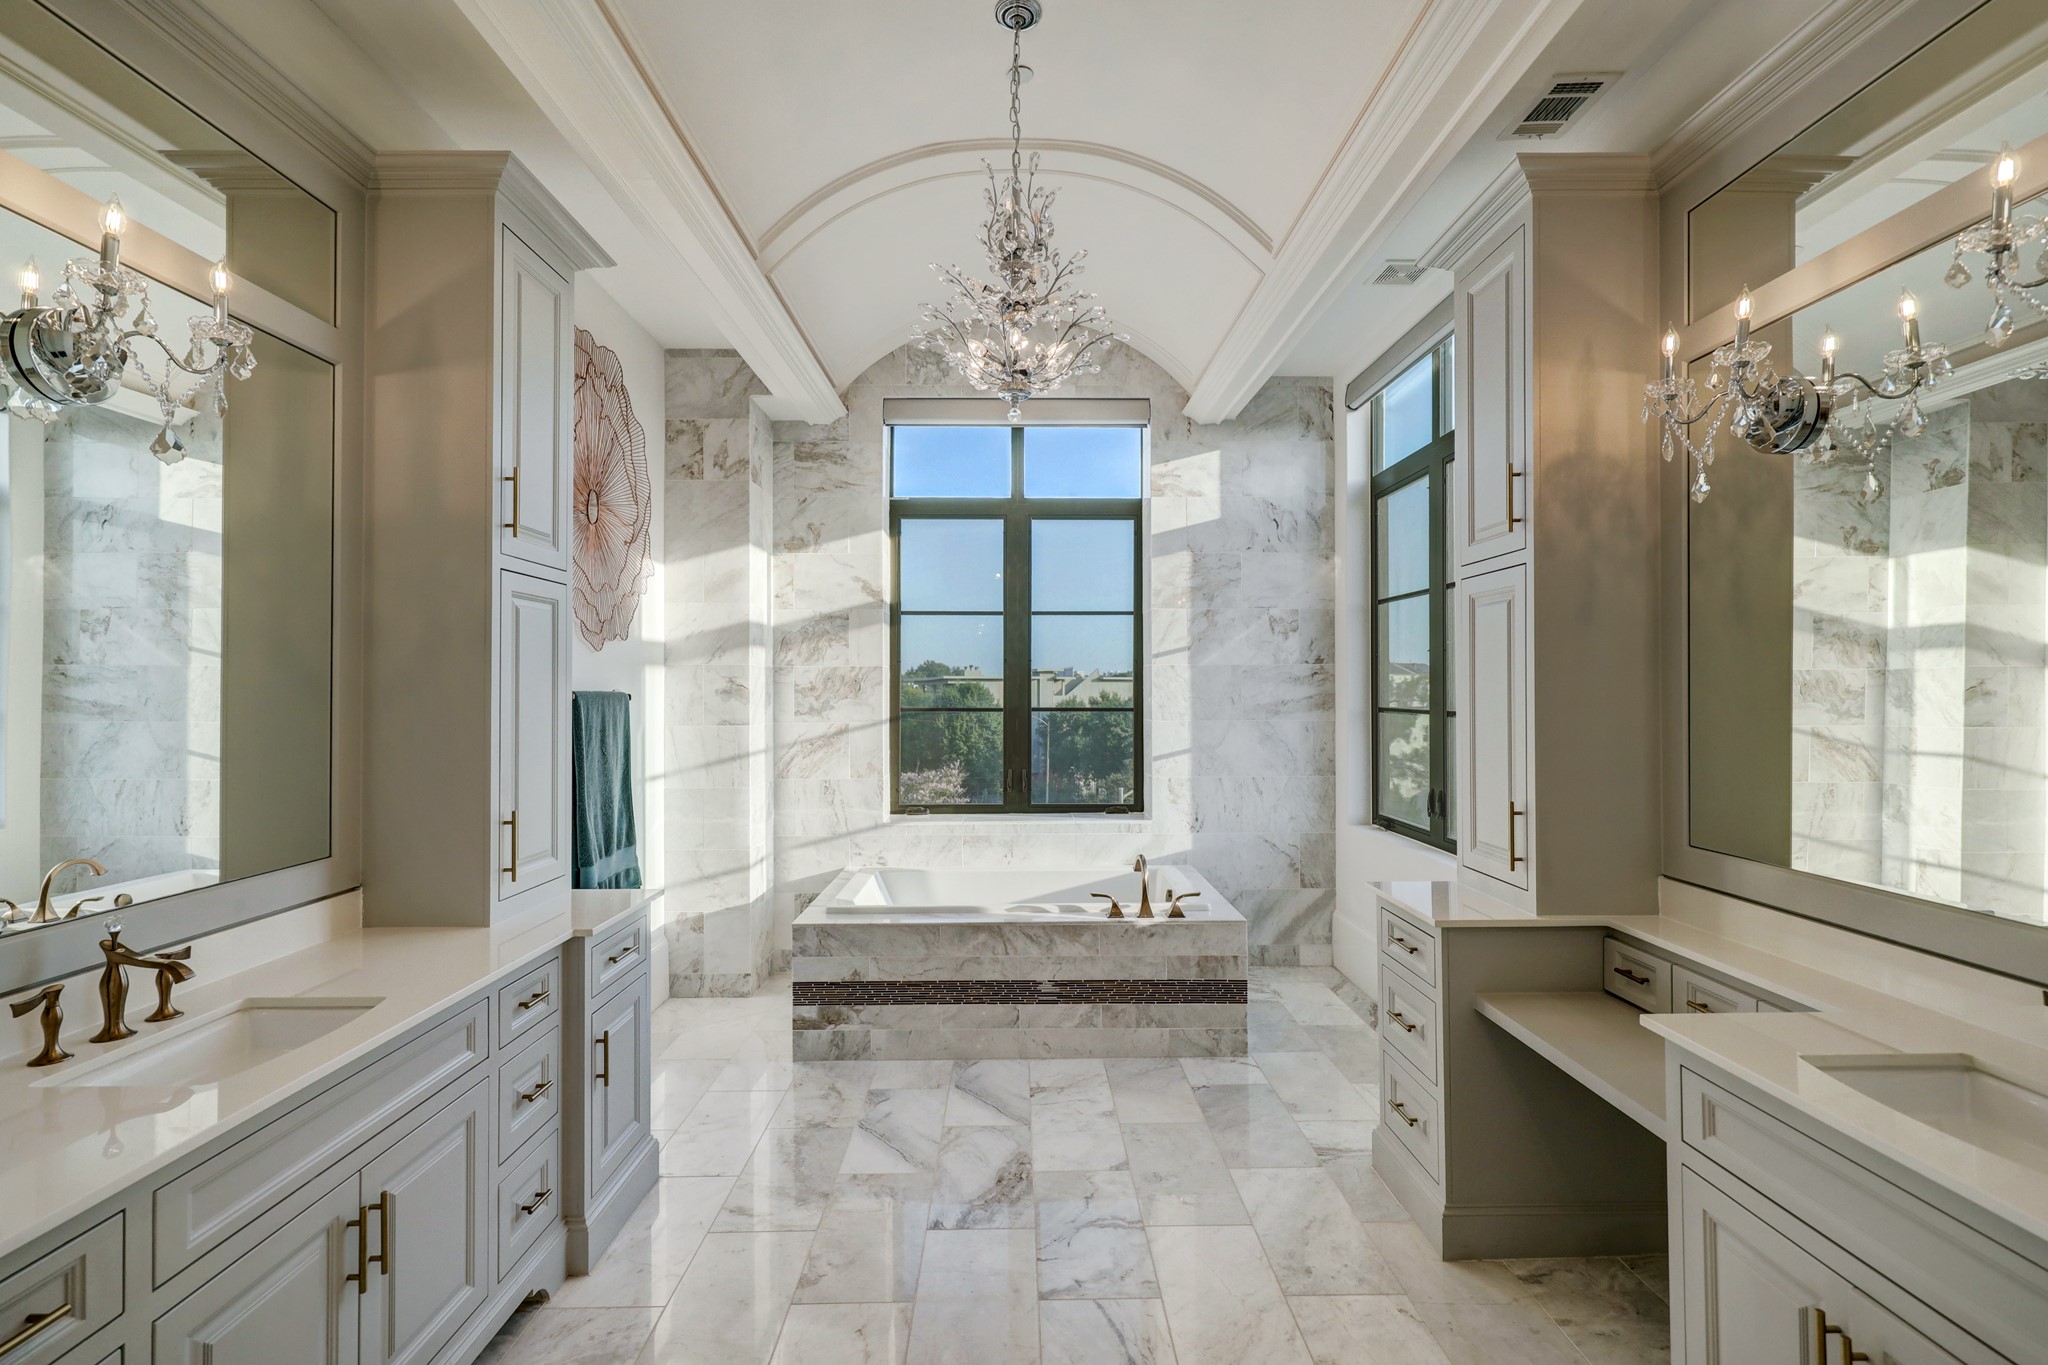 Dual sinks, make up vanity and picture windows are featured in the primary bath.